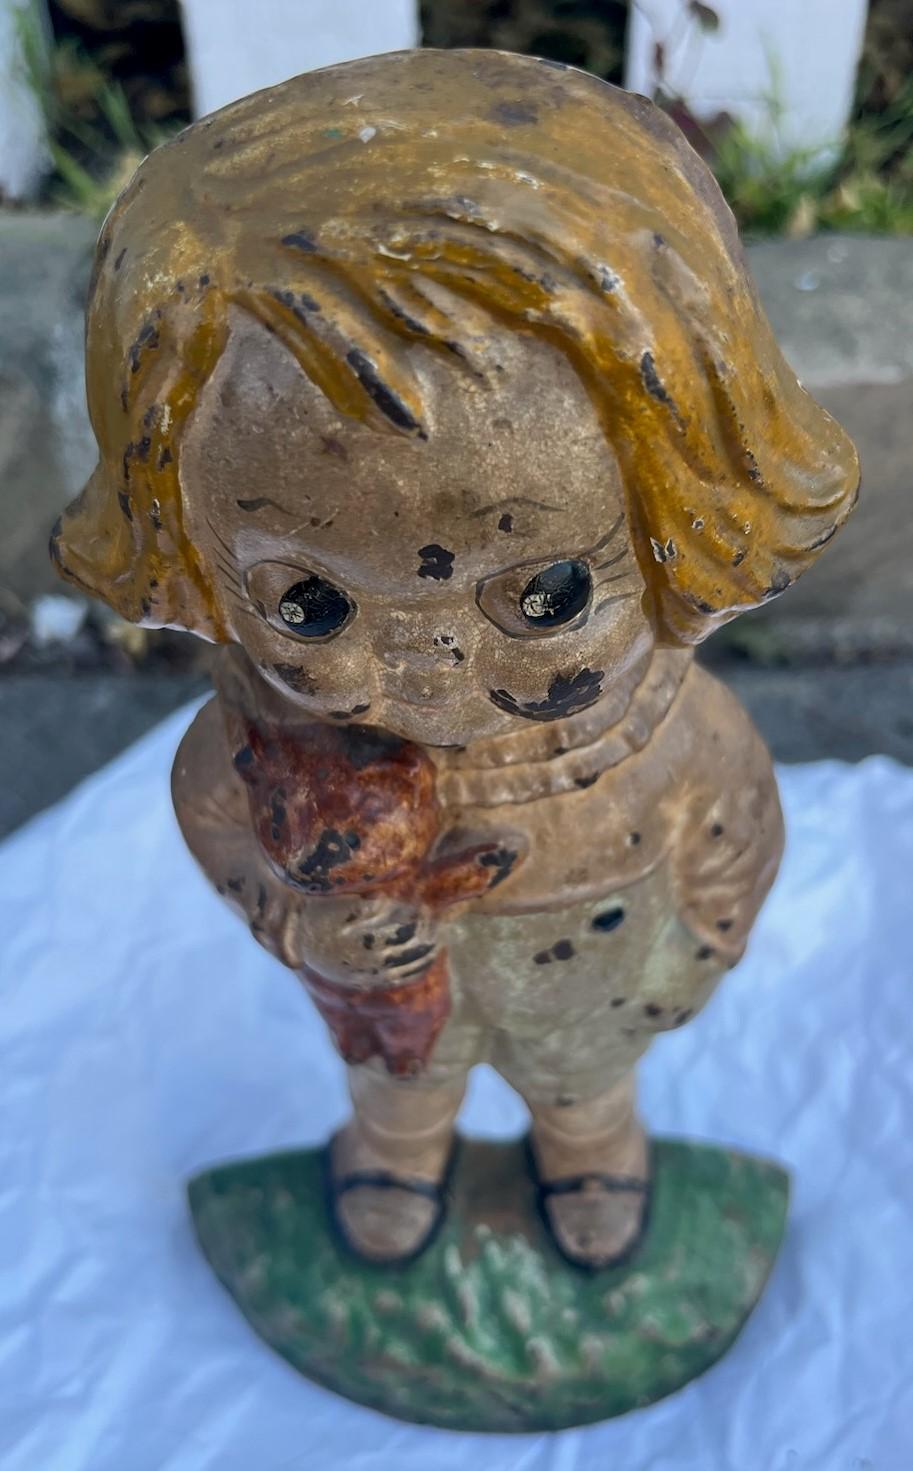 This fun and folky Kewpie girl cast iron doorstop is quite rare and in original painted surface.Notice she is holding a teddy bear.So amazing to find one like this in undisturbed surface.